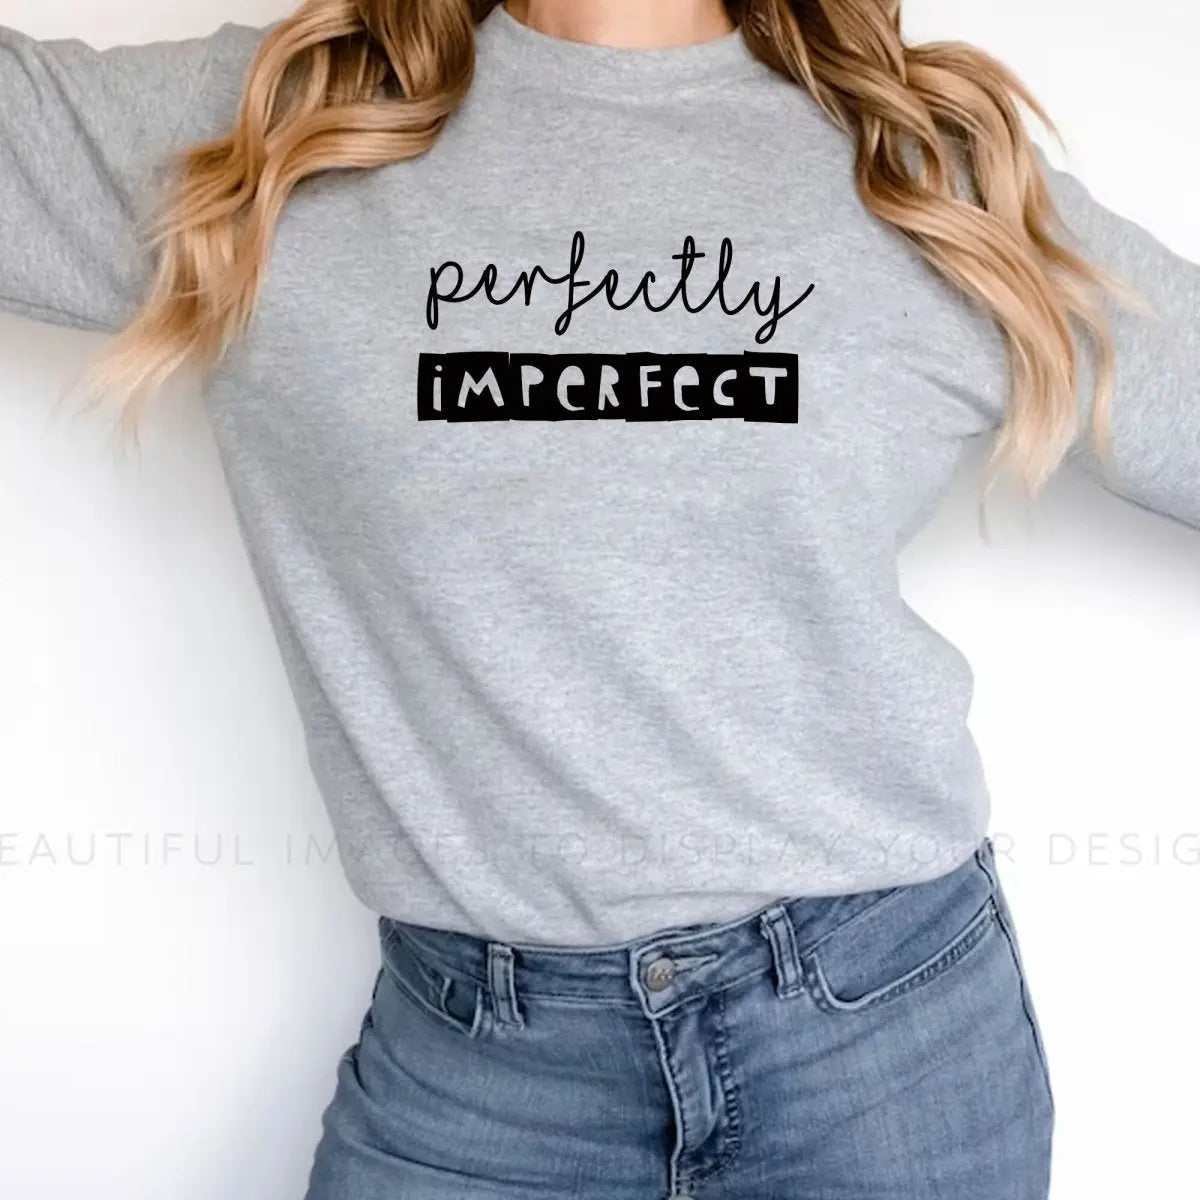 Perfectly Imperfect Sweater, Perfect Jumper, Self Love Sweater, Casual Ladies Sweater, Casual Jumper, Ladies Jumper, Beige Sweater, Stylish - Amy Lucy